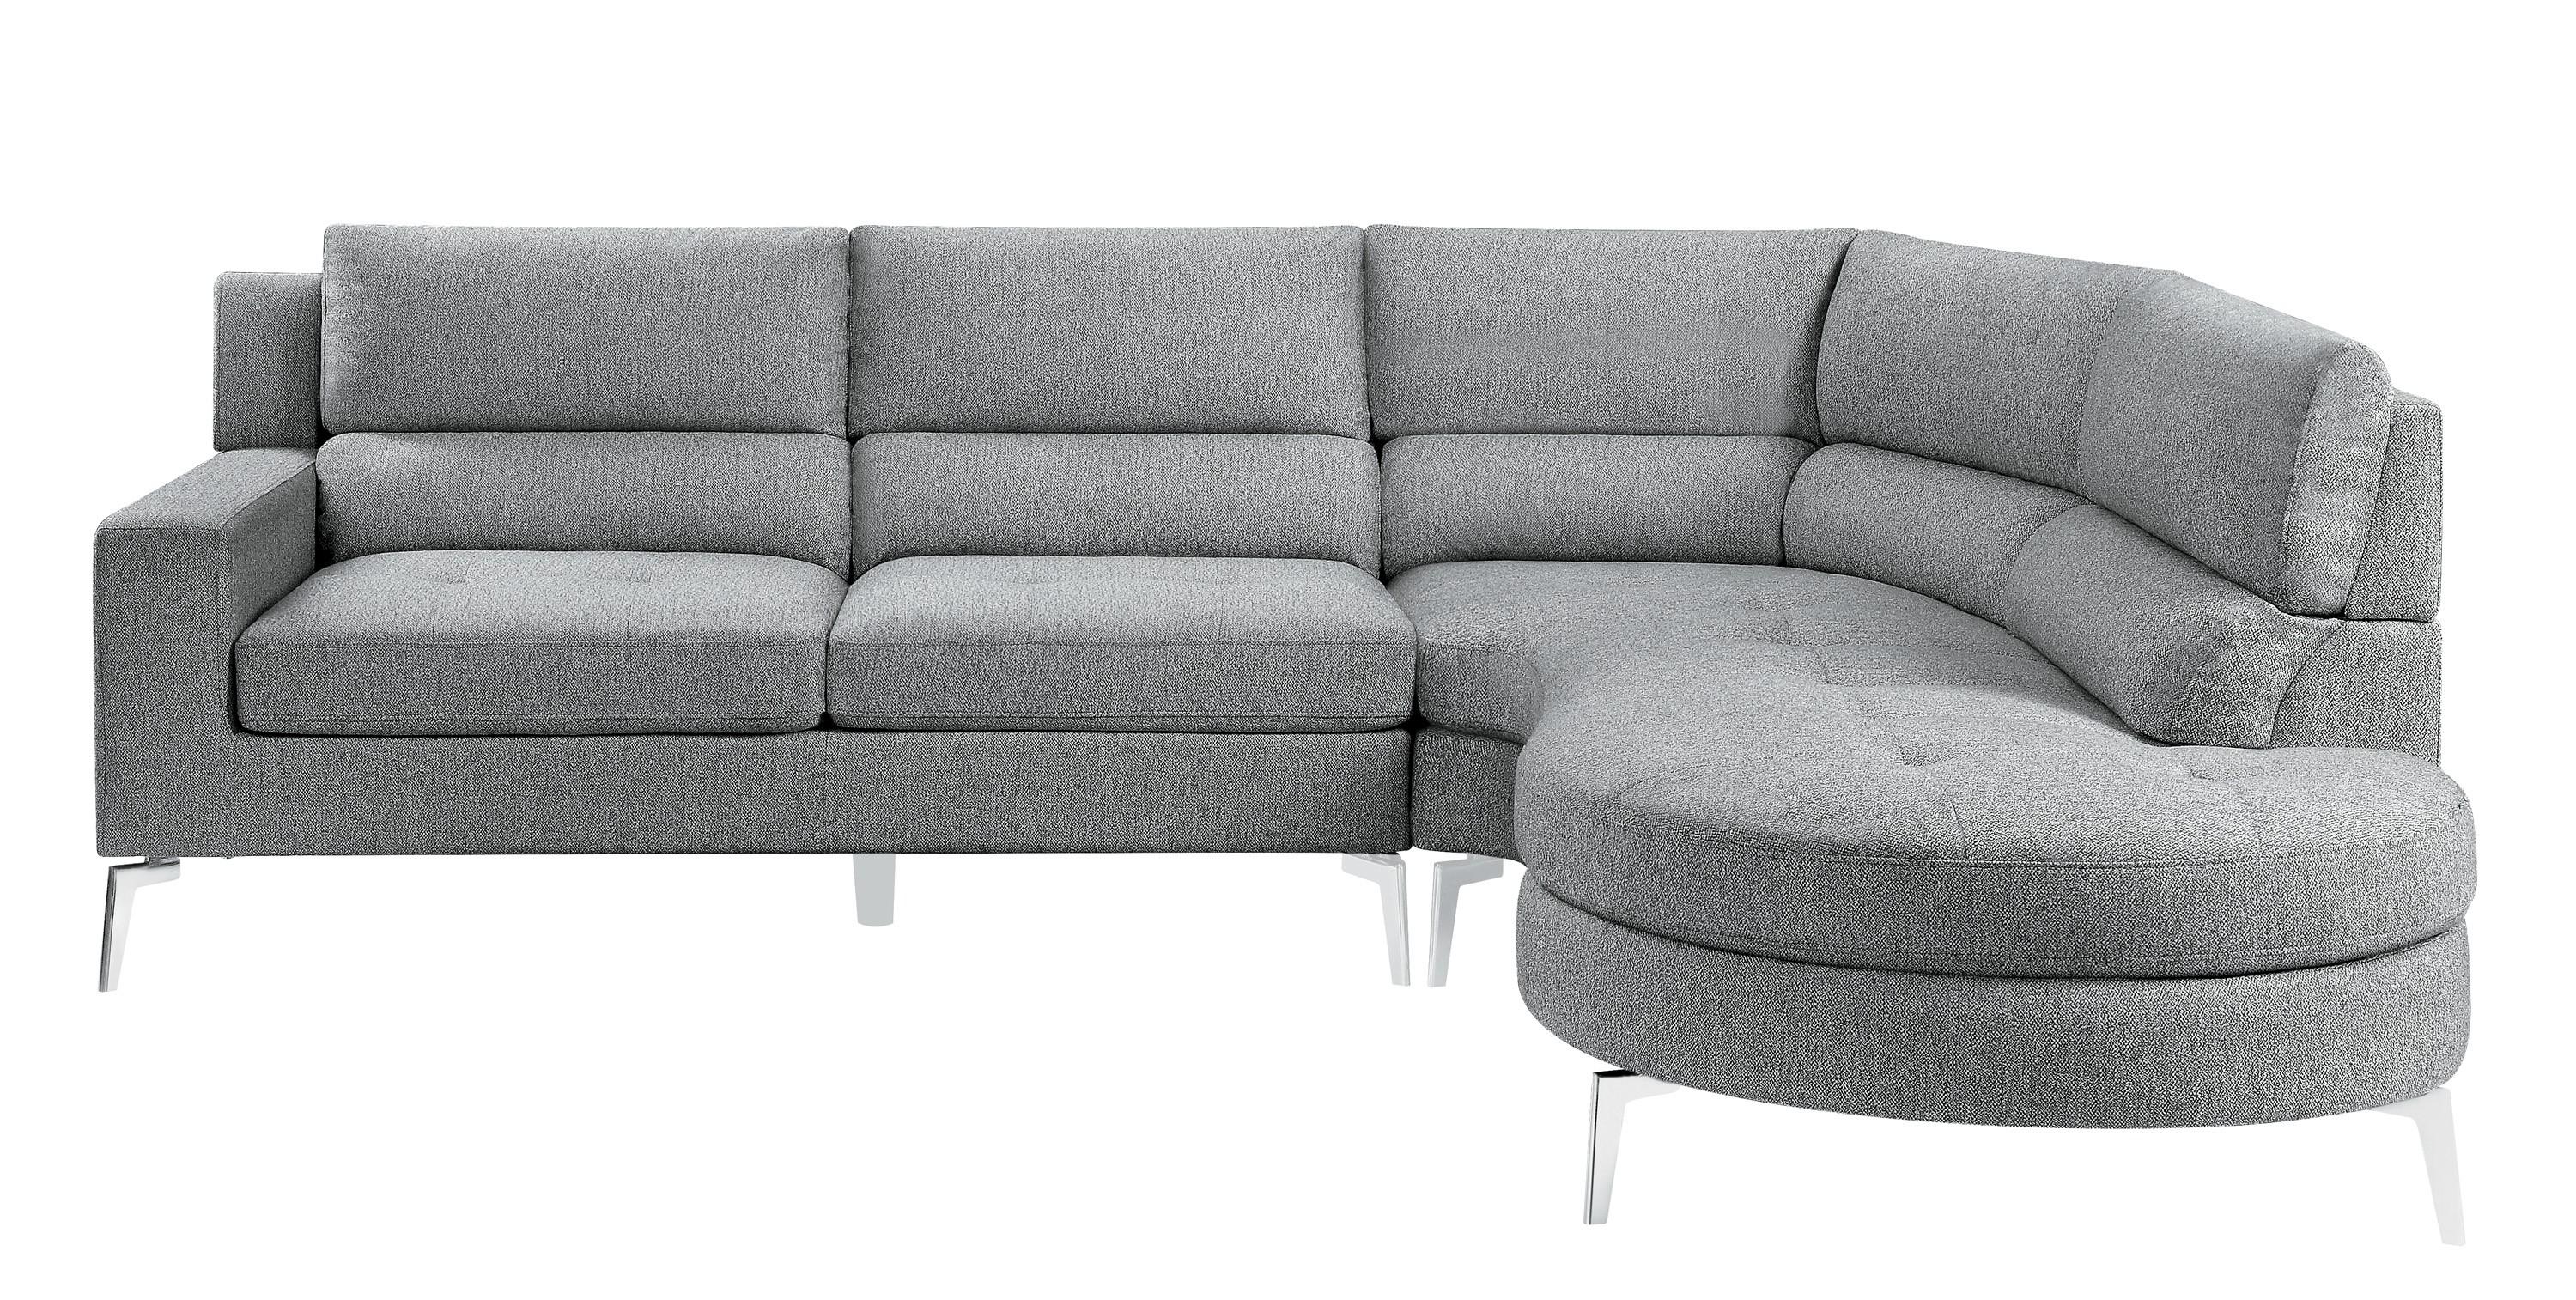 Contemporary Sectional 9879GY*SC Bonita 9879GY*SC in Gray 